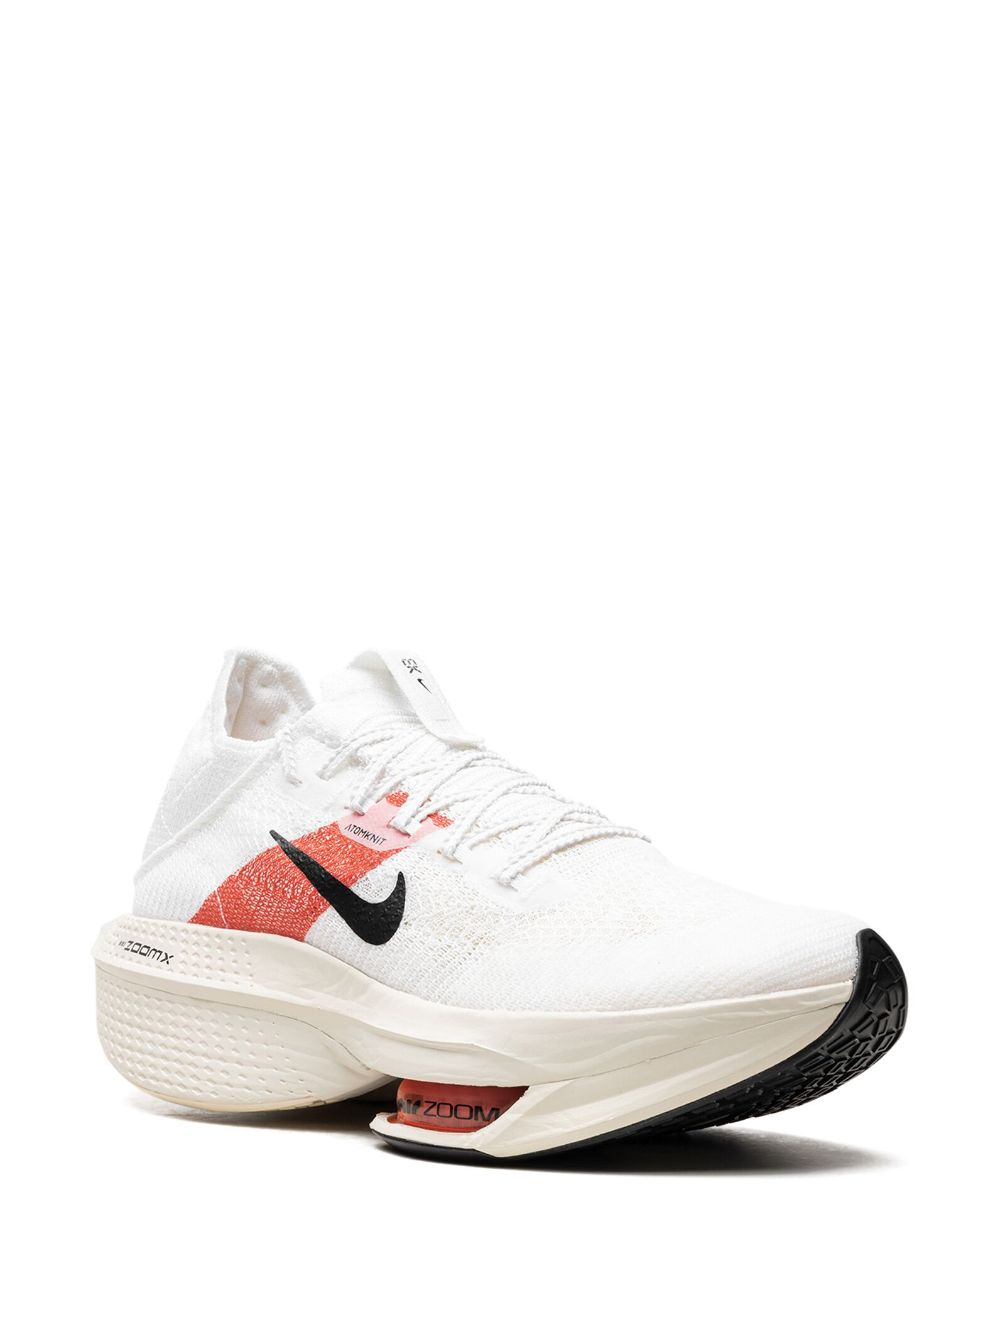 Image 2 of Nike Alphafly 2 low-top sneakers